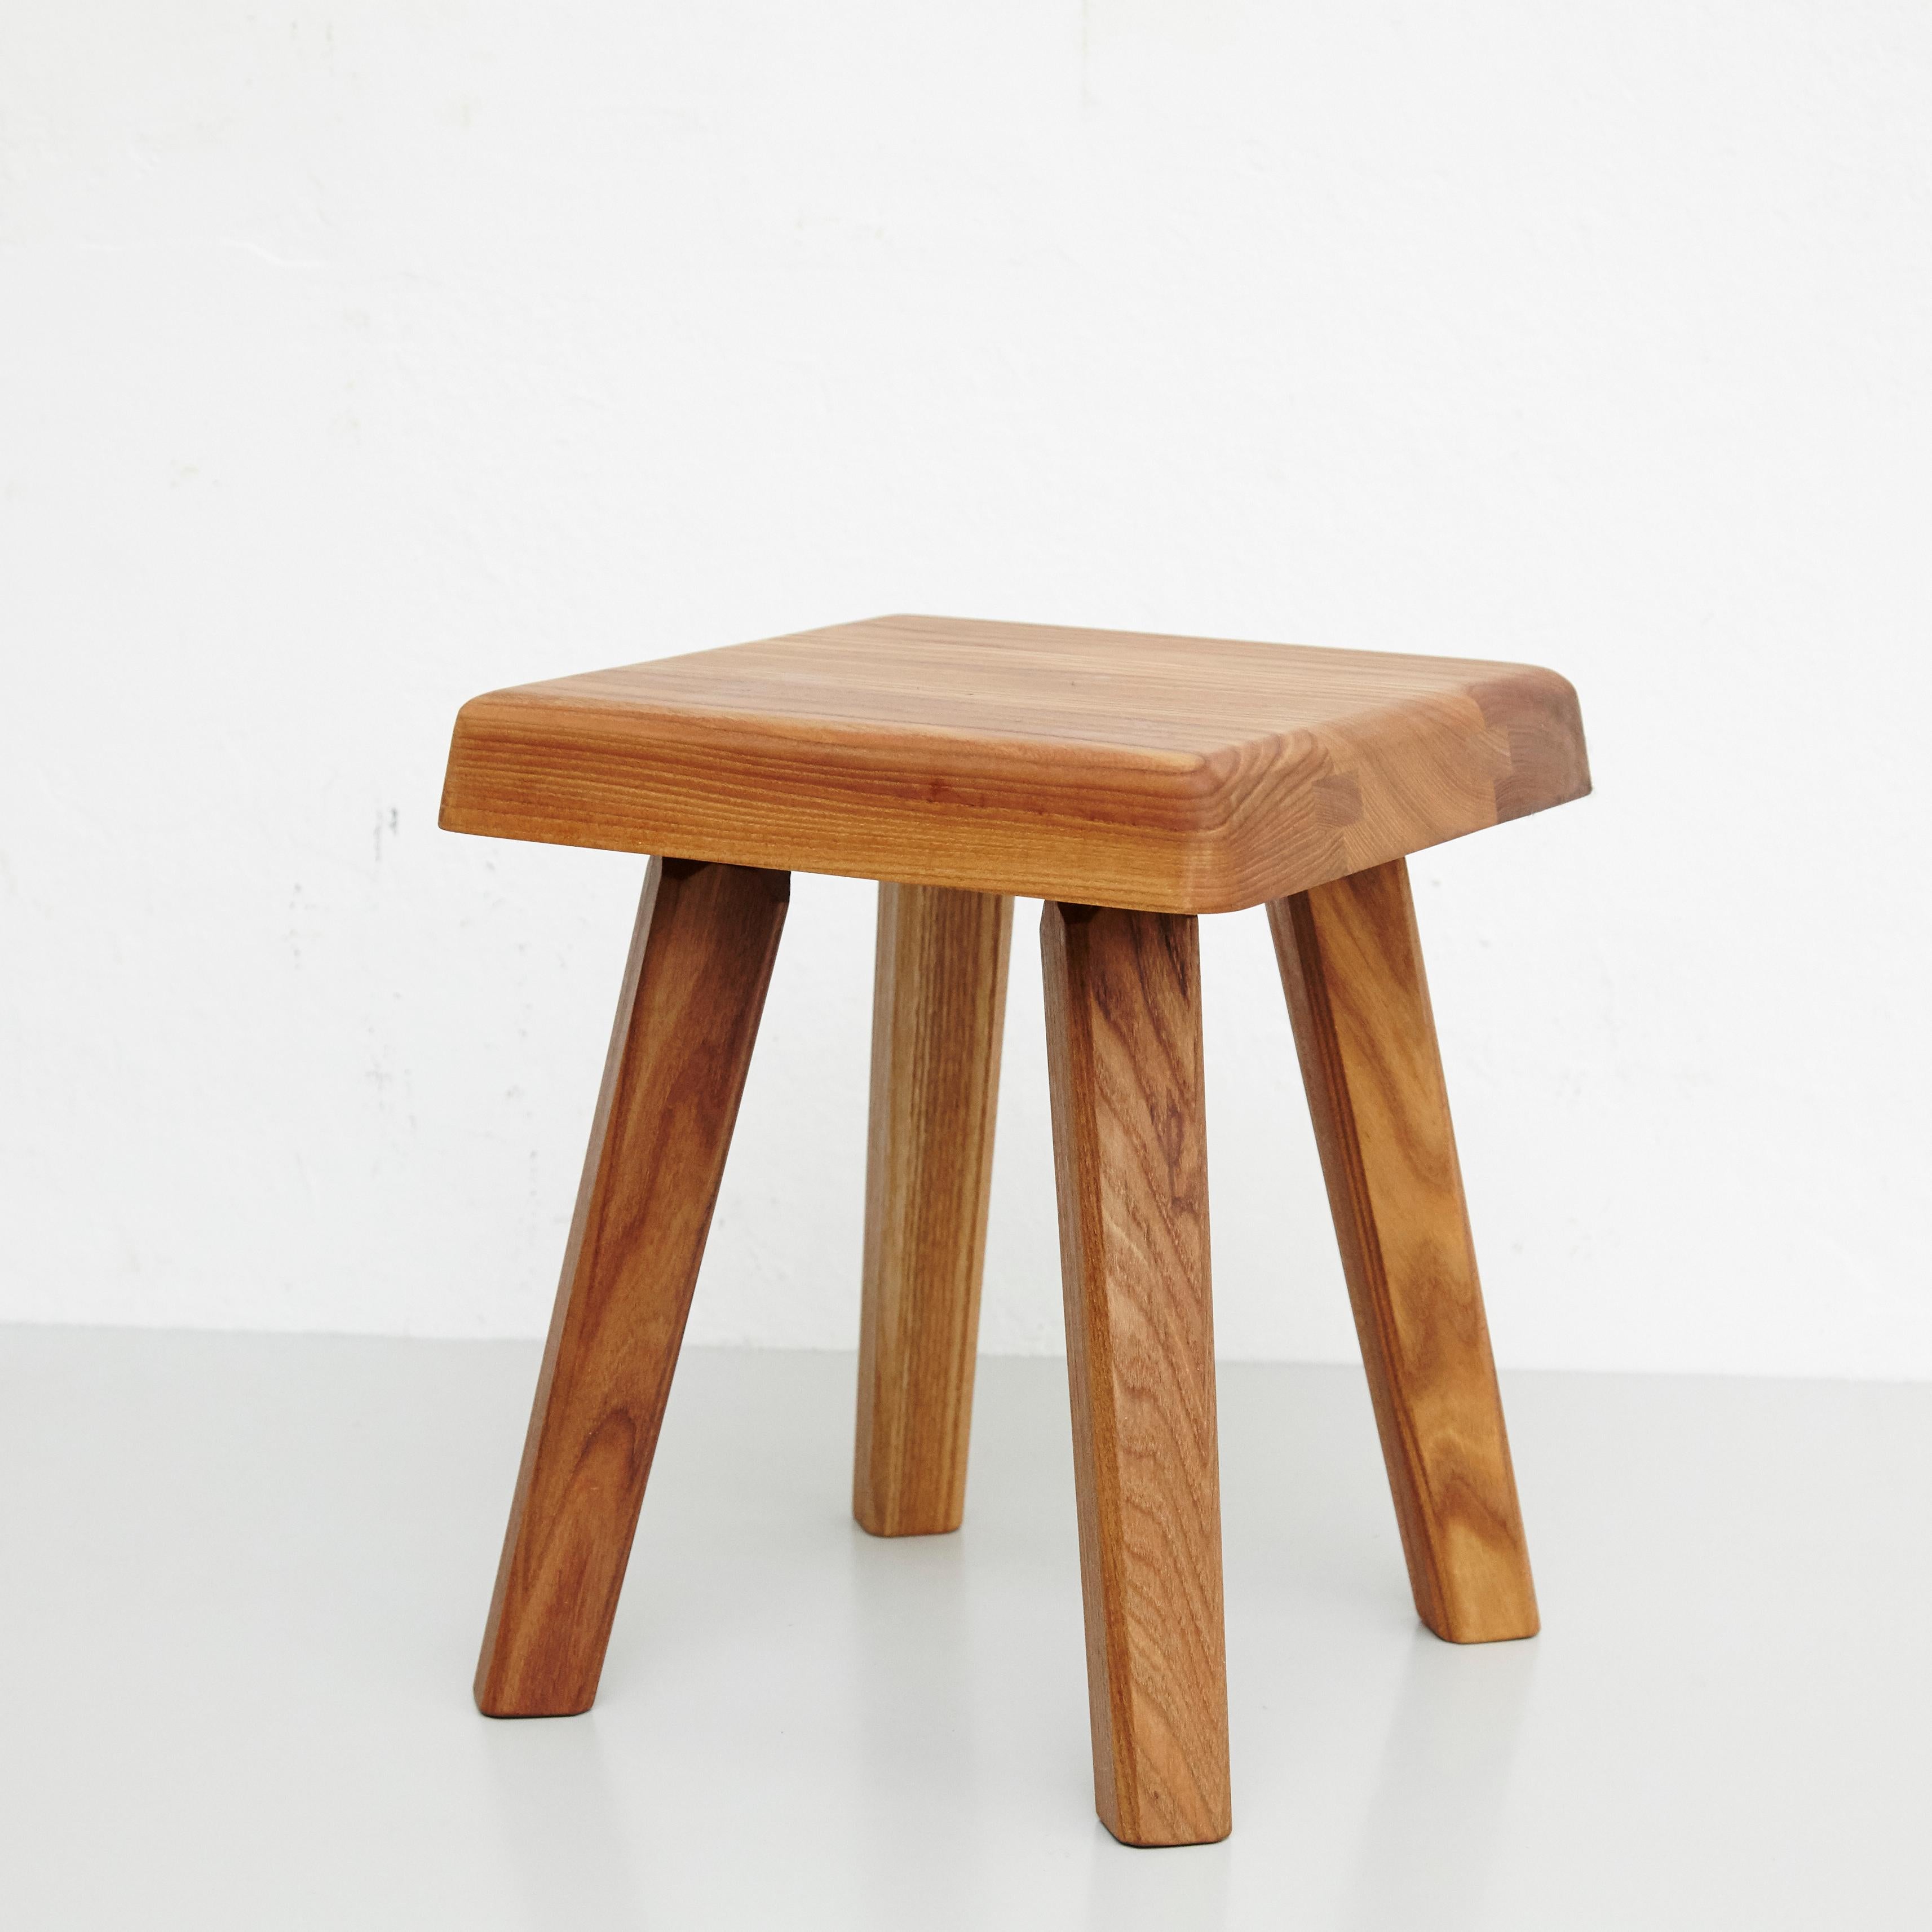 Stool designed by Pierre Chapo in 1960s.
 Manufactured by Creation Chapo in France in 2020.

Solid elmwood.

In good original condition, with minor wear consistent with age and use, preserving a beautiful patina.

Pierre Chapo is born in a